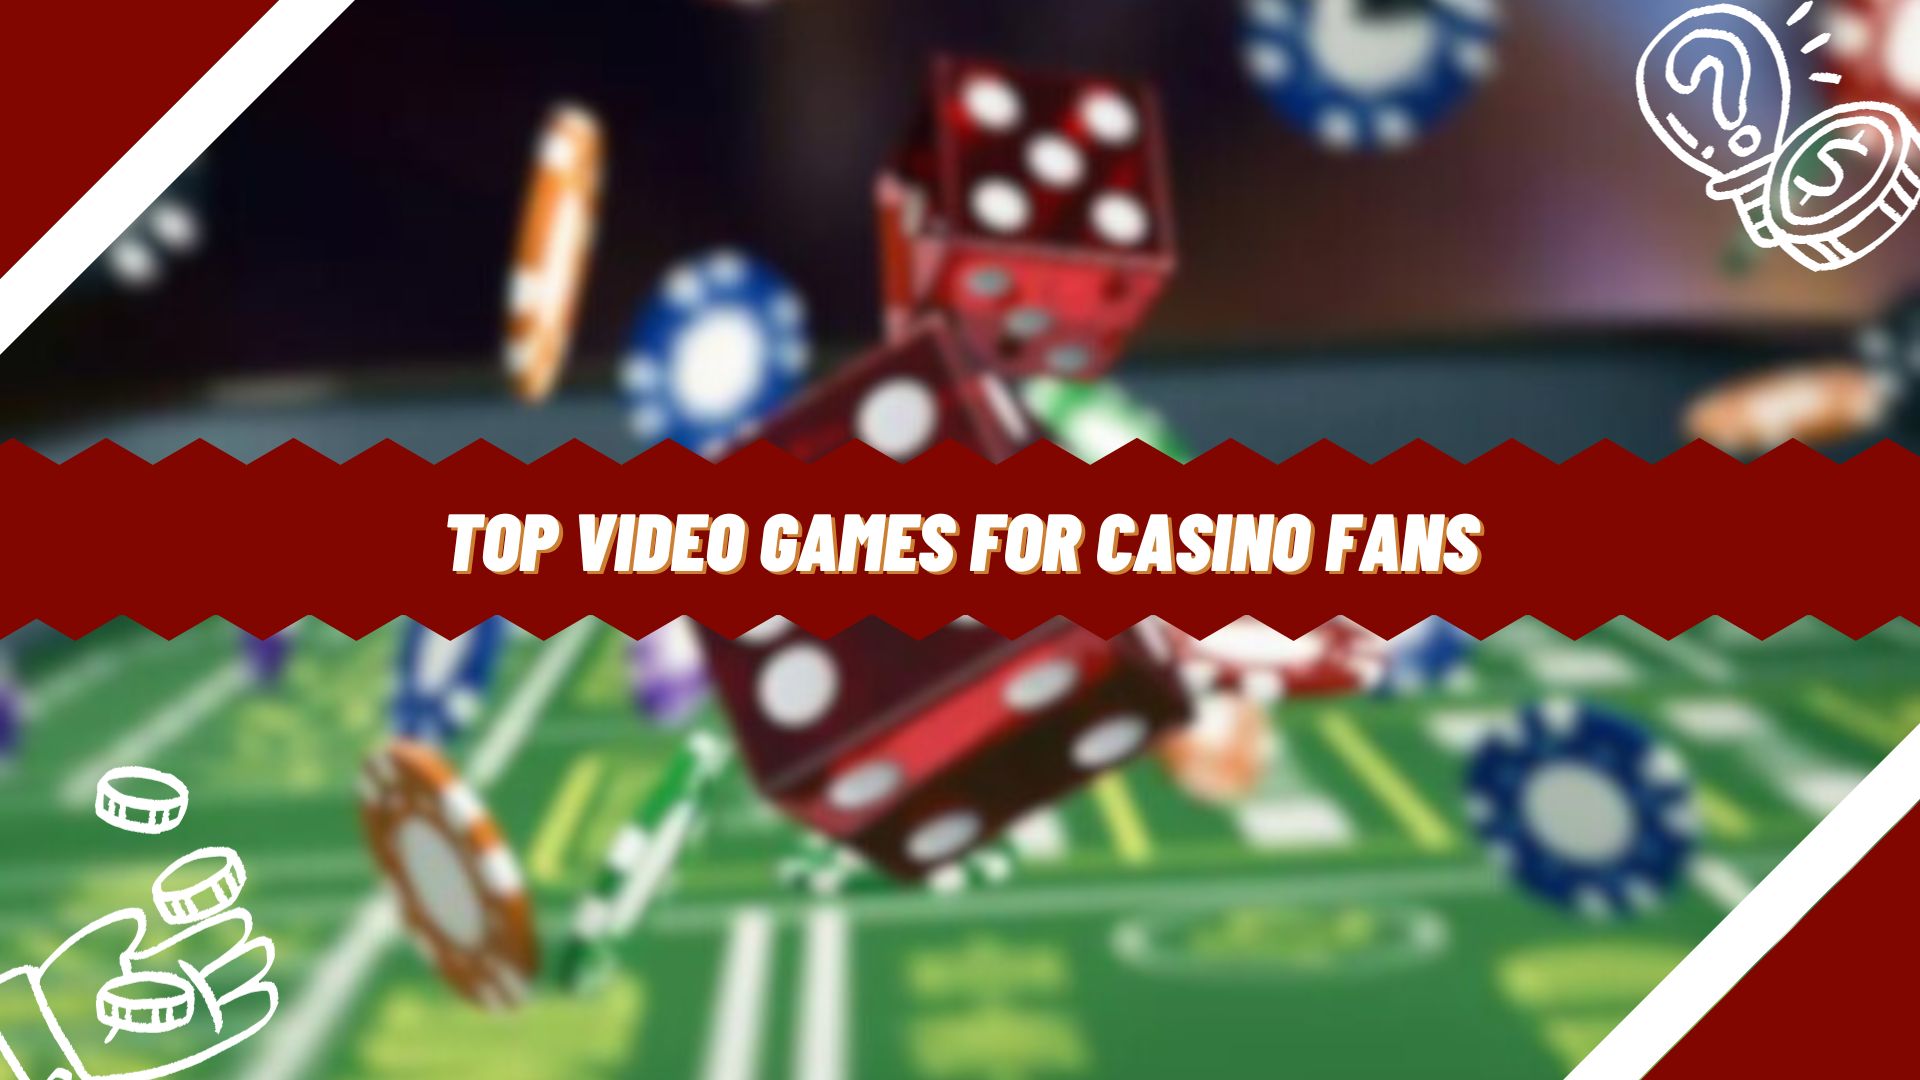 Top Video Games for Casino Fans